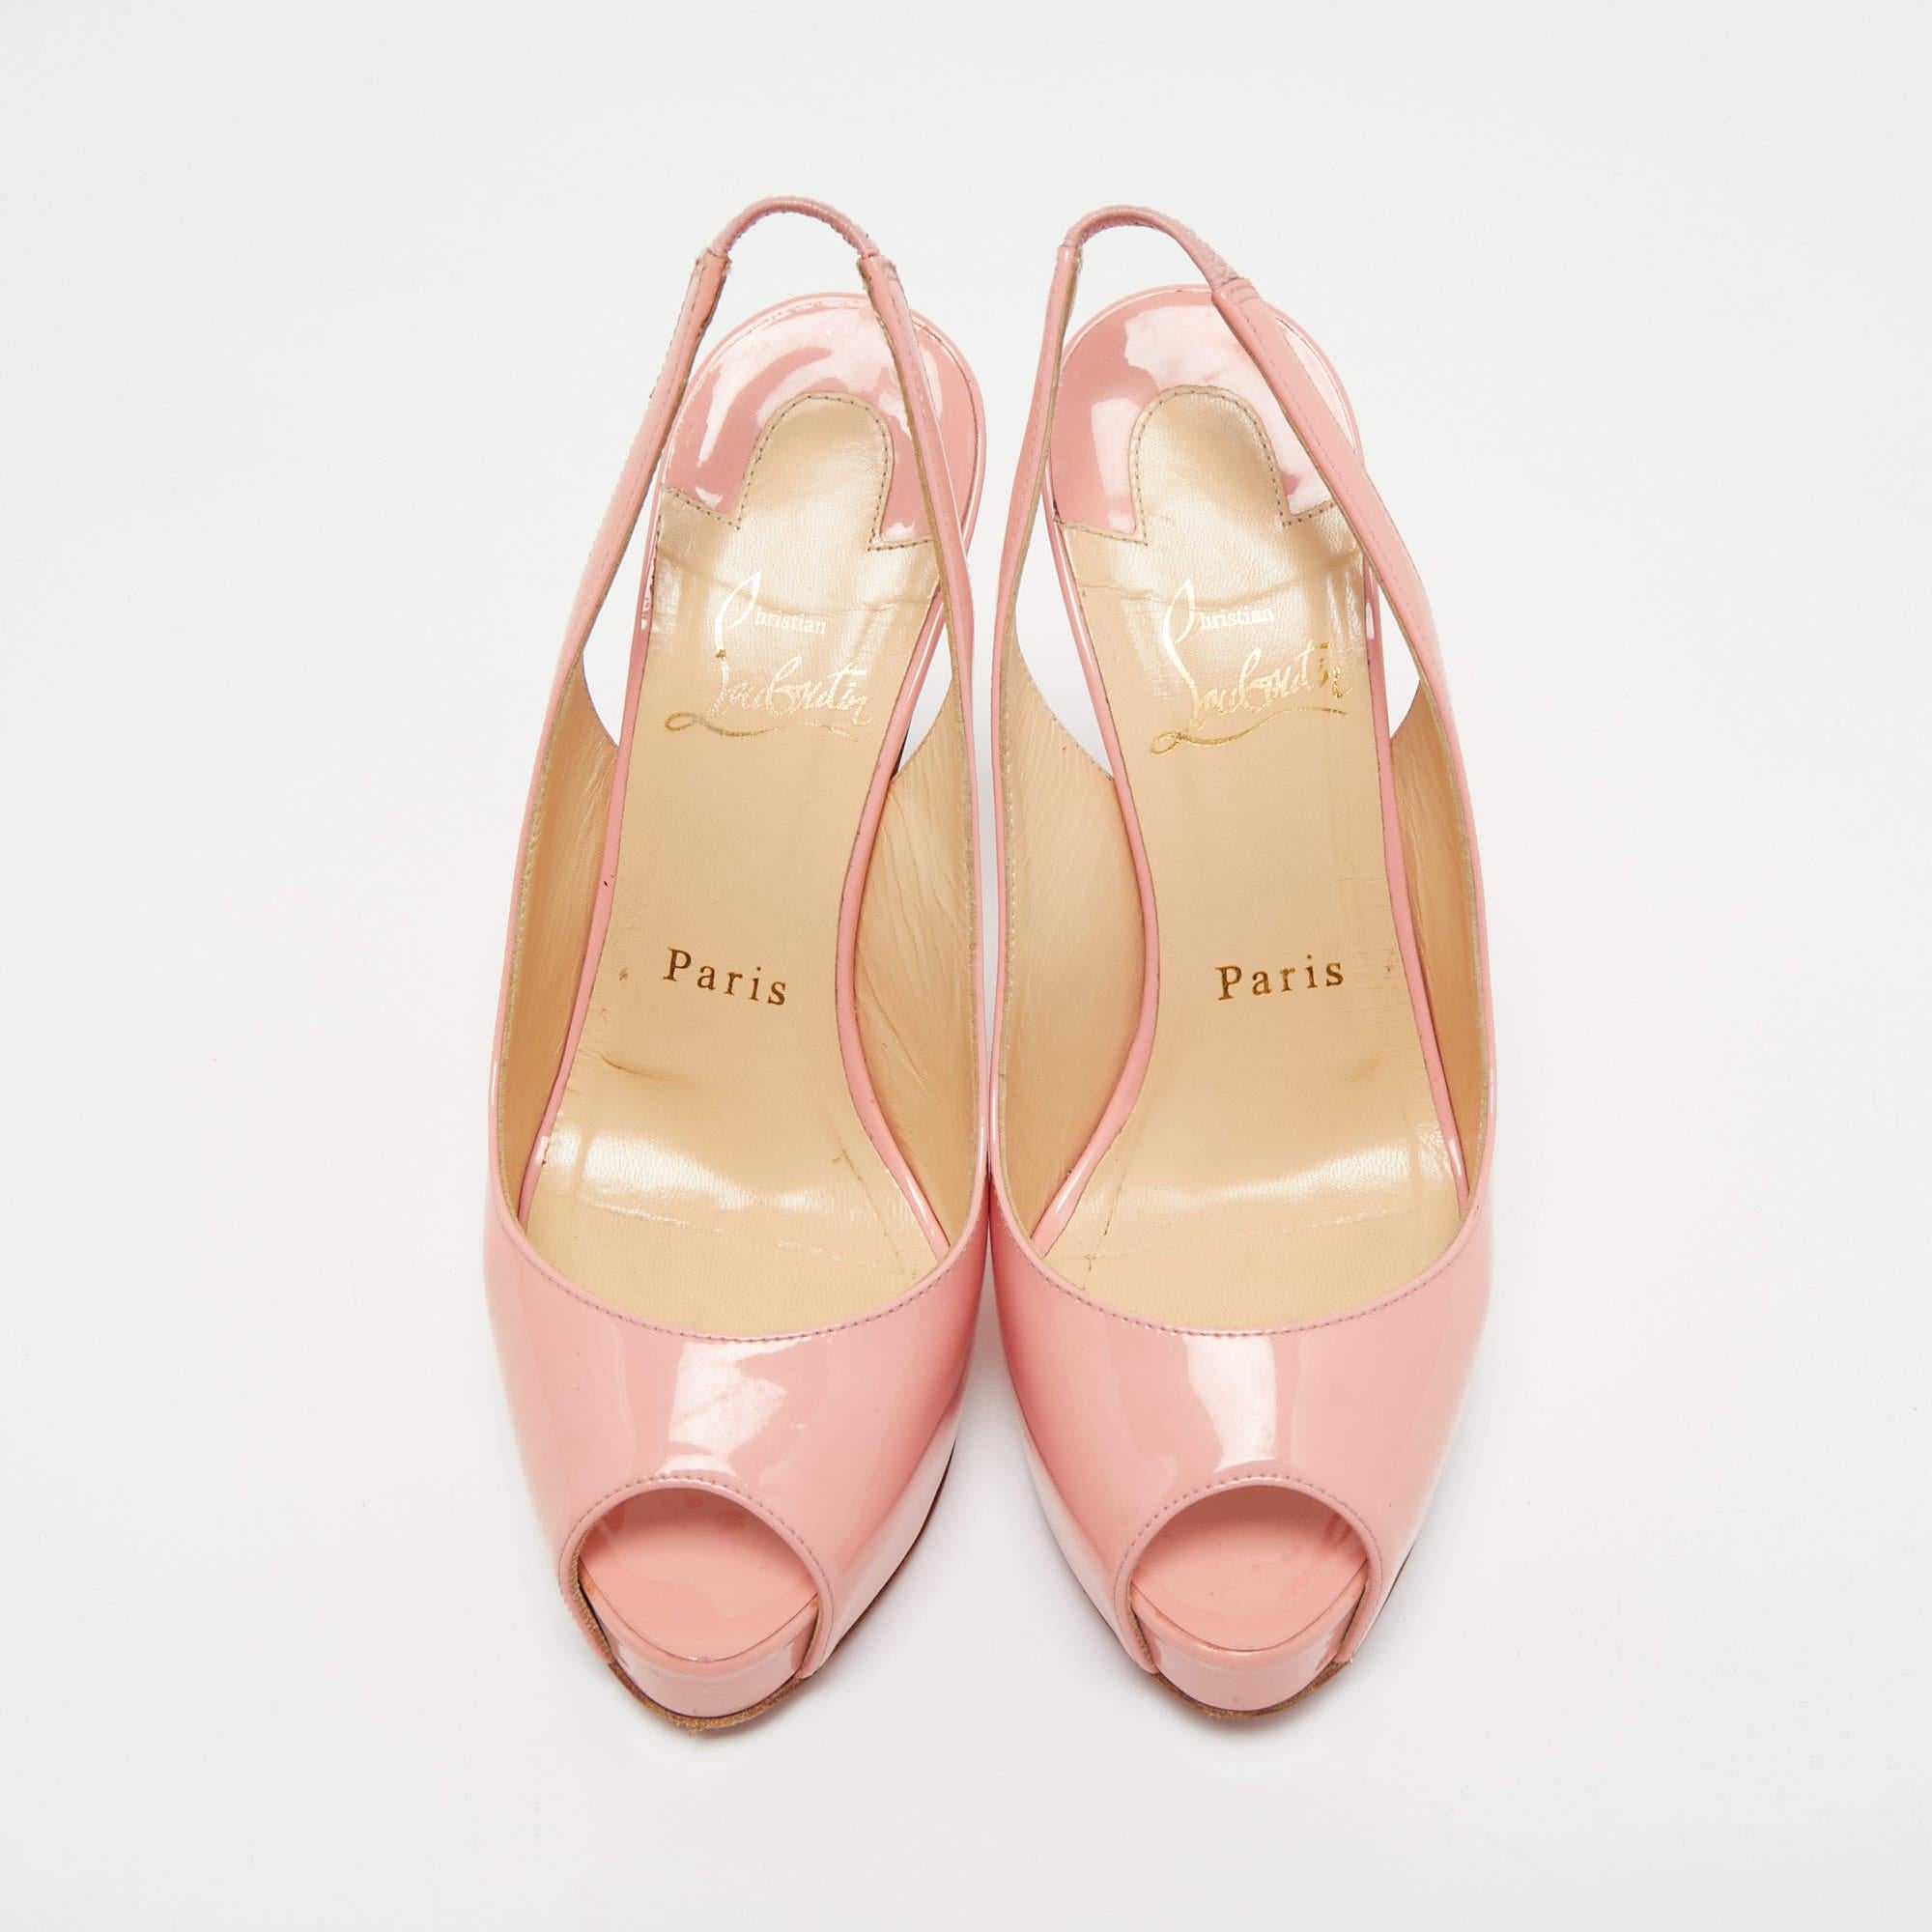 Pumps like these will help you walk with confidence and elegance. Crafted from high-quality materials, these pumps are set on tall heels. Style them with your formal or dressy outfits.

Includes
Brand Box